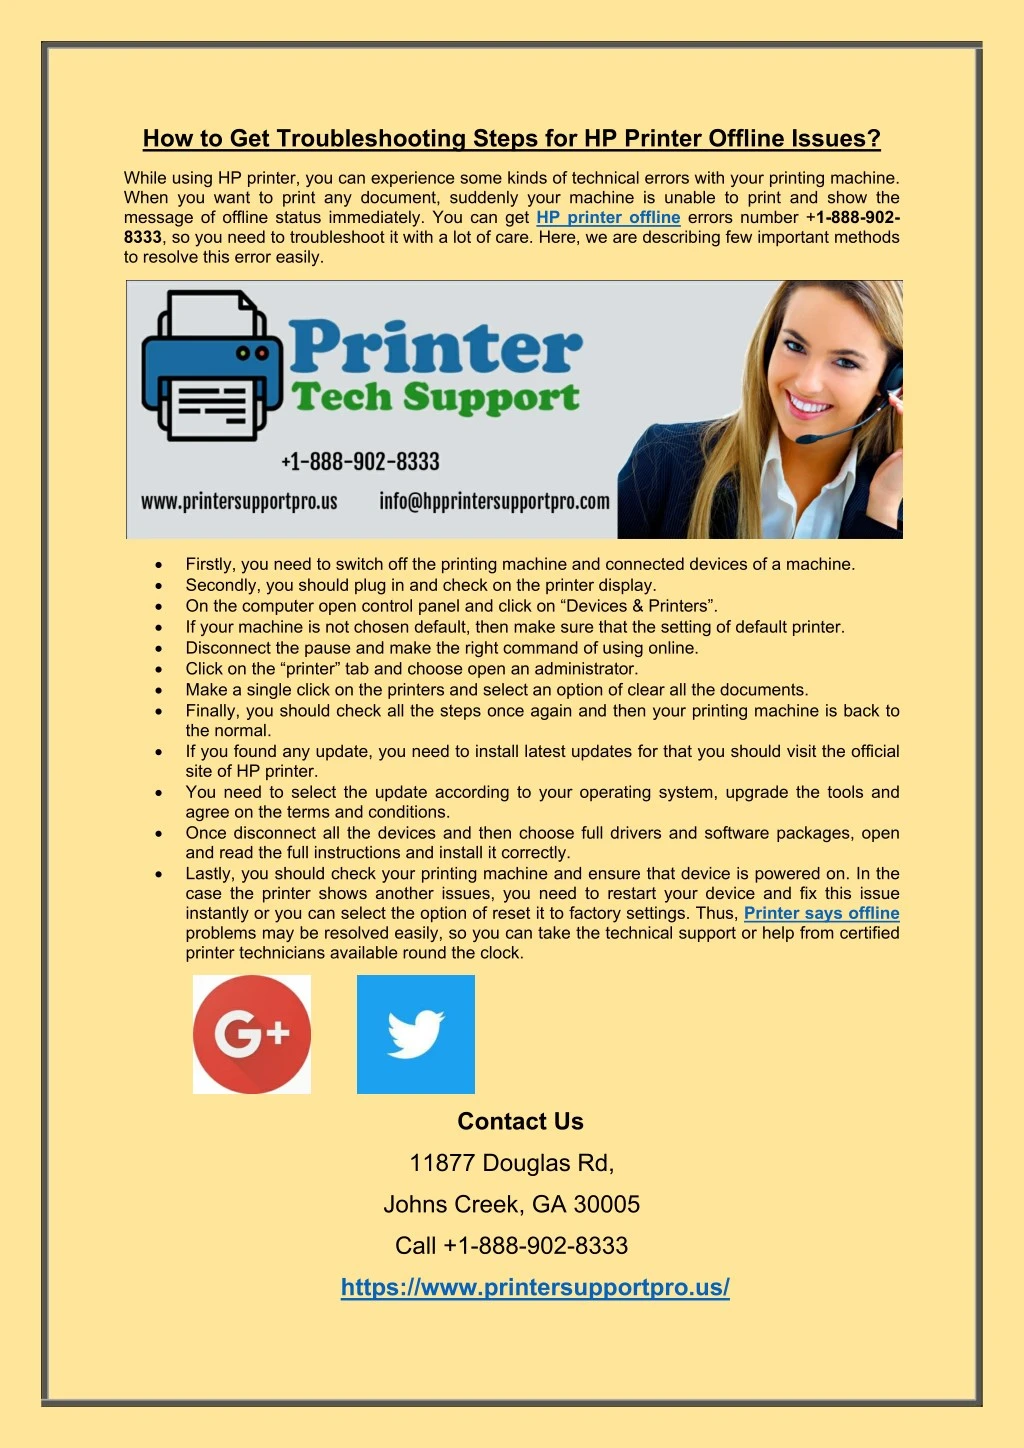 how to get troubleshooting steps for hp printer